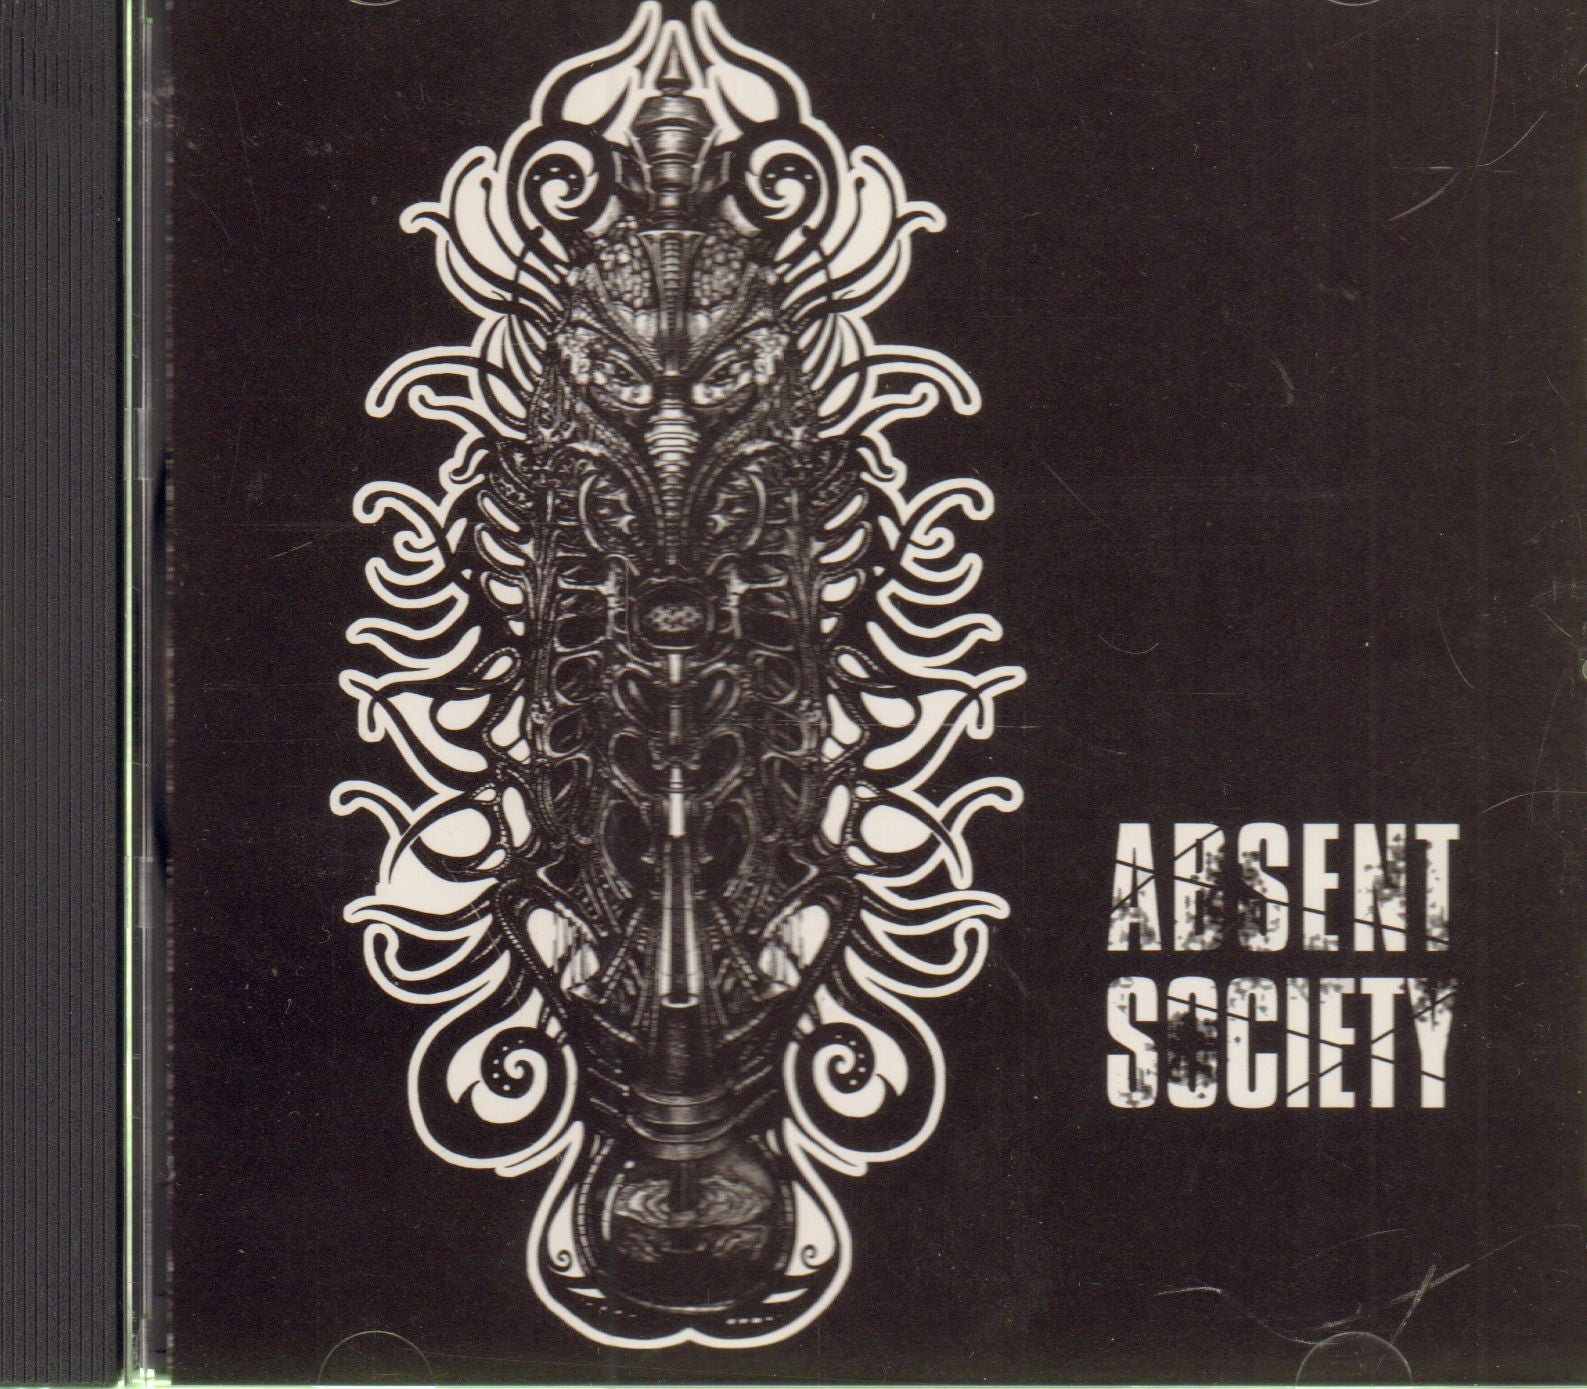 Absent Society-Opaque Eyes Seal Our Fate-CD Album